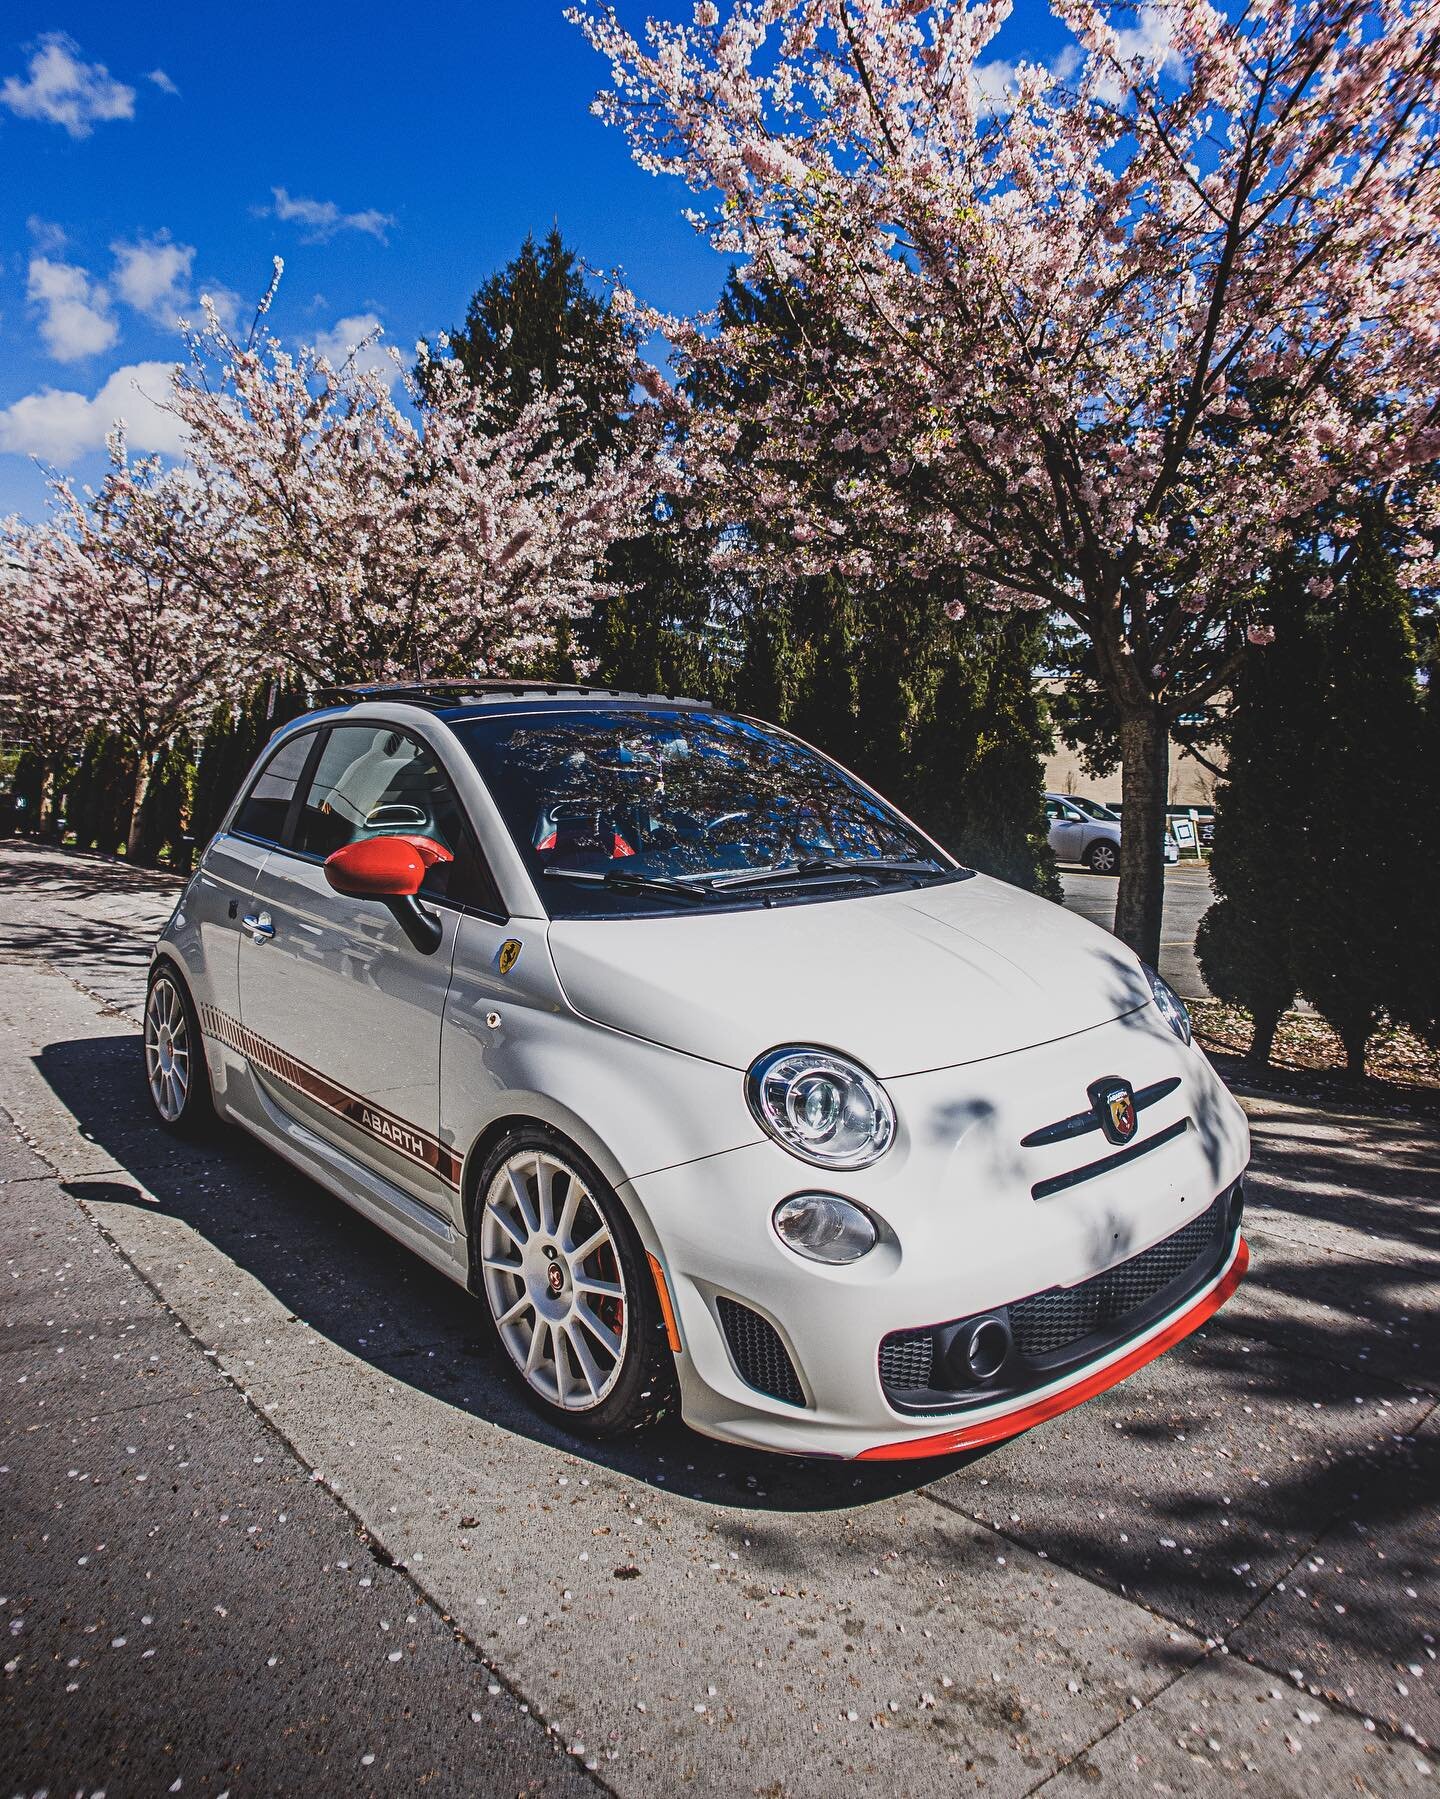 Spring has arrived🌸

Lovely photo by @wudriven 

&mdash;&mdash;&mdash;&mdash;&mdash;&mdash;&mdash;&mdash;&mdash;&mdash;&mdash;&mdash;&mdash;&mdash;&mdash;&mdash;&mdash;

#abarth #abarth500 #abarthaddict #abarth595 #abarth124 #abarthgram #abarthitali